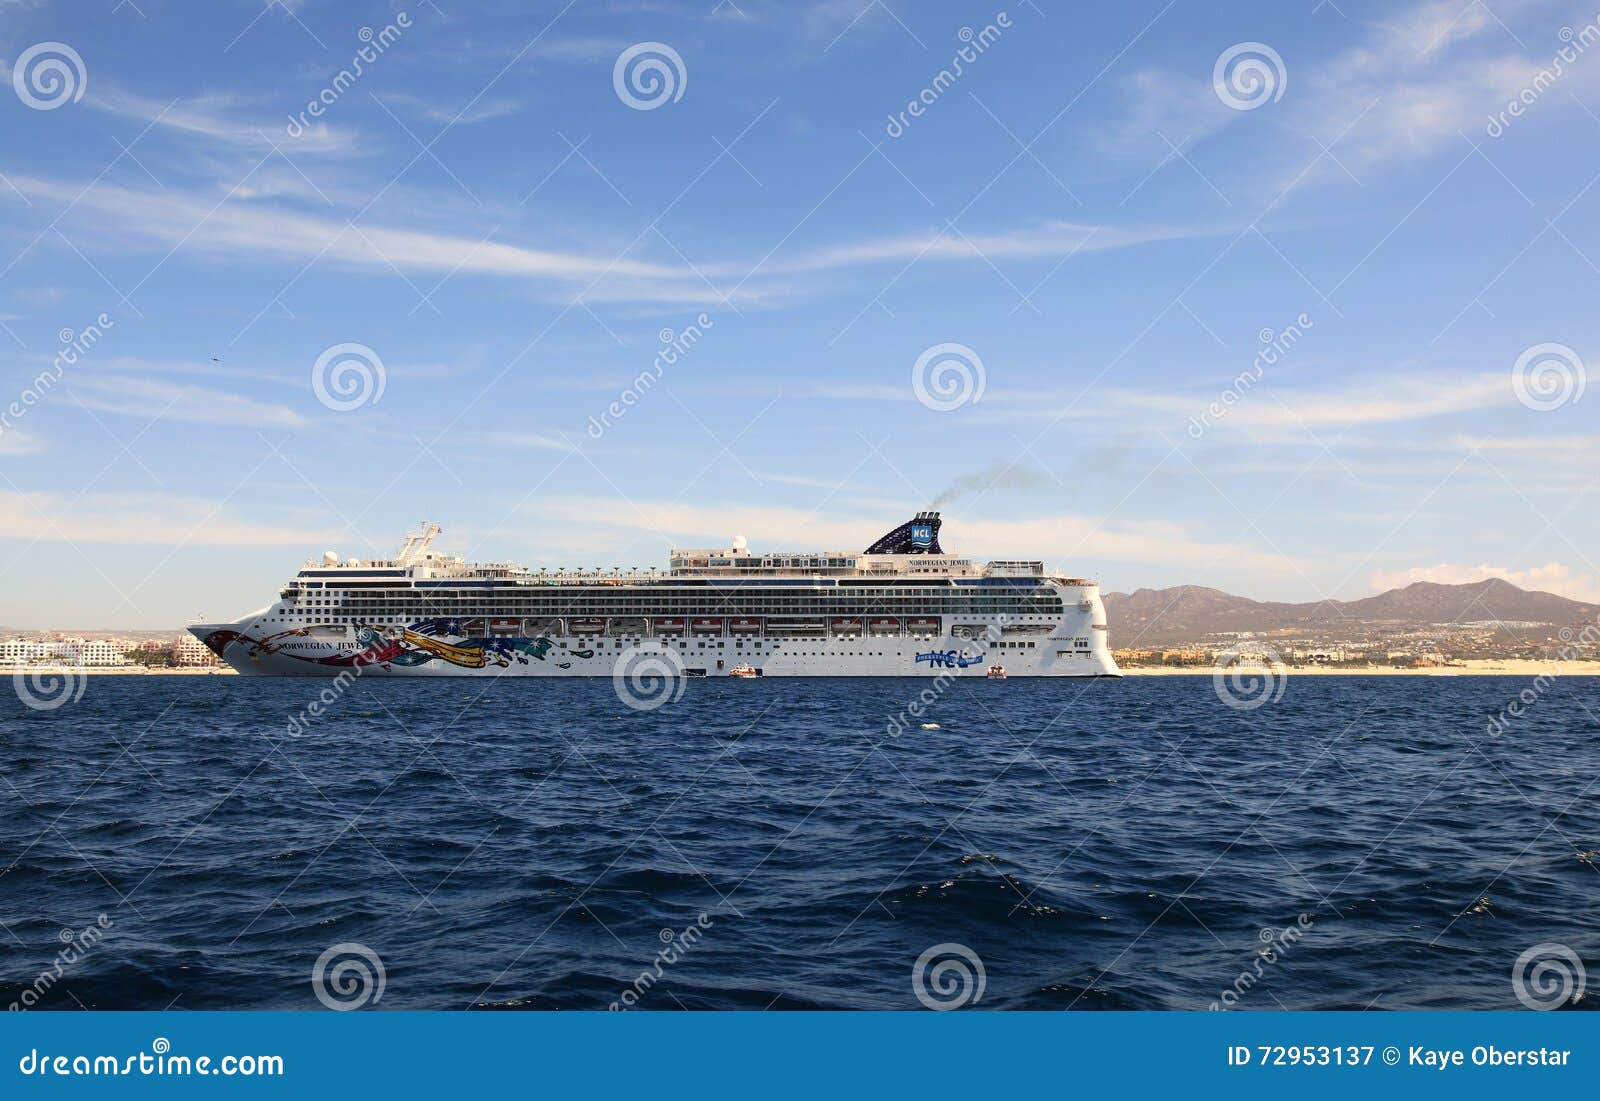 Norwegian Cruise Lines Editorial Photography Image Of Ship 72953137 